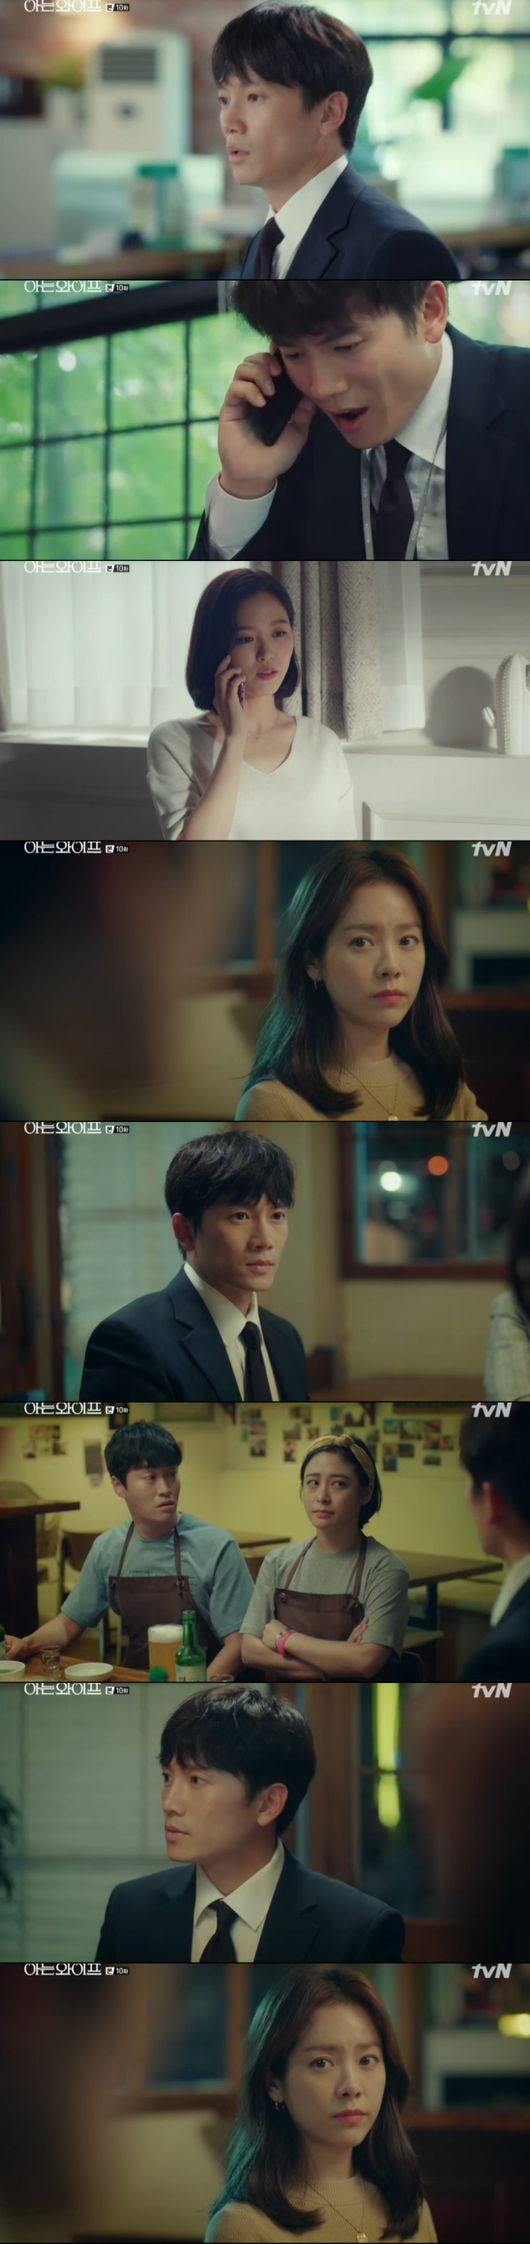 In Knowing Wife, Han Ji-min and Ji Sung fell in love again even in the fate of the change. Can everything be returned to its original state?In the TVN drama Ai Wife (directed by Lee Sang-yeop, and the play by Yang Hee-seung), which was broadcast on the 30th, Woojin (Han Ji-min) conveyed his heart toward Ji Sung.On this day, Woojin kept thinking about the moment when he and Juhyuk came into contact. So was Juhyeok.The next day, Woojin greeted him in search of the room where the family of Joo Hyuk was in the hospital, and the more he looked at Woojin, the more he liked it, and Joo Hyuk smiled bitterly.Ju-hyuk overheard the call of Ju-eun, and it was difficult to nurse the sick child until the day.Hye-won was disappointed when she never made the appointment, and then there was a big argument with Joo-hyuk, who returned home, and Hye-won, who returned home the next day, turned all the wedding photos with Joo-hyuk.It seemed as if he expressed the closed mind of Hyewon.Hye-won sent the request for a divorce and the burdens of the ju-hyuk to Delivery. He called Hye-won, saying, Do you have to do this?Hyewon said, I do not do this because I want to do this. I do not want to do what I want, I can not live as you want, I need someone who is more than anyone else.Joo Hyuk said it was all his fault.The news of Juhyeoks divorce was also told to the end and Woojin. Juhyuk was confused, saying, I do not know.I am in favor of Divorce, he said, and the two of them are not so good. After the end, he advised, Do what Juhyuk wants.Woojin kept his words, and looked at Juhyuk.Ju-hyuk was taken to the house of the end of the day. Ju-hyuk recalled Hye-wons words saying, You have changed, you are not the same as you were all I said.But Hyewon did not receive it. Ju-hyuk looked at the end of his happy relationship with Woojin.After the end, he wrote to Woojin whether he entered well, and Woojin also replied, asking for his best regards, but soon he deleted the letter again.Woojin went to Juhyeok and asked if Hyewons problem was due to him. Juhyuk said, I do not care, its my fault.Hye-won urged Ju-hyuk not to take time. Ju-hyuk asked him to think about it once more. Hye-won dragged out the divorce, saying, I do not want to consume emotions.Woojin finished dating Jonghu, and accidentally witnessed Hyewon and a young man (Hyunsu) together.Then, I heard that Joo Hyuk and Hyewon went to the courthouse, and I went to the house where Joo Hyuk was with the end of the day. Woojin was concerned about Joo Hyuk who tried to eat cup noodles alone.On behalf of such Woojin, the end prepared food, and there was an awkward feeling between Woojin and Joohyuk.My friends comforted Juhyuks divorce, but Juhyuk blamed himself for saying, Its all my fault, Im not good.The company had a marathon competition: after Woojin, Joo Hyuk and Jonghu arrived. Woojin was worried about the heavy drinking of the previous day.After the end, he looked at Woojins condition, saying that he would carry Woojin, but Woojin continued to care about Joohyuk.When Woojin heard that he had fallen into a cardiac arrest among the Marathon participants, he worried that he might be Ju-hyeok.I thought the person in the ambulance was Juhyuk, but fortunately it was not Juhyuk. At this time, Juhyuk appeared in front of Woojin, and Juhyuk asked, What is it, do you know?Woojin wept with relief, and felt more confused in his mind.After Marathon, he had a dinner party. Woojin calmed him down with a drink. Joo-hyuk looked at Woojin.While Joo Hyuk was on the phone, he saw Woojin, who was drunk, blowing outside. They decided to break the drink at the playground.Woojin sat down at seesaw and was fortunate to say, My heart also fell down every time I was a child.Then, to Ju-hyuk, who was going back, Woojin stood up saying, Im a little calmed down. But still he was drunk, and Ju-hyeok helped Woojin.Joo-hyuk burned Woojin on a visible three-wheeled bicycle.At this point, Woojin fell; Joo Hyuk asked, Woojin! Are you okay? and then grabbed Woojins hand and tried to raise him.Woojin said, I do not mind, I do not know what I can not do. I know that I can not do it, but I know it is not my way from the beginning. I have been blind, I want to be blind, I want to be uncomfortable, I feel comfortable and dependent.I just do not know everything, conscience, guilt, I do not know, and just one thing is that I like the deputy a lot, he confessed with tears.Joo Hyuk refused to say, No, no, we can not, and Woojin pulled such a ju-hyuk and kissed him.On the other hand, in the trailer, a homeless man who changed the fate of Juhyeok said, There is still a chance, an opportunity to turn everything back. He also predicted an interesting development to turn the turning point of the drama by drawing a coin to him and returning to the past.Capture the broadcast screen of Knowing Wife